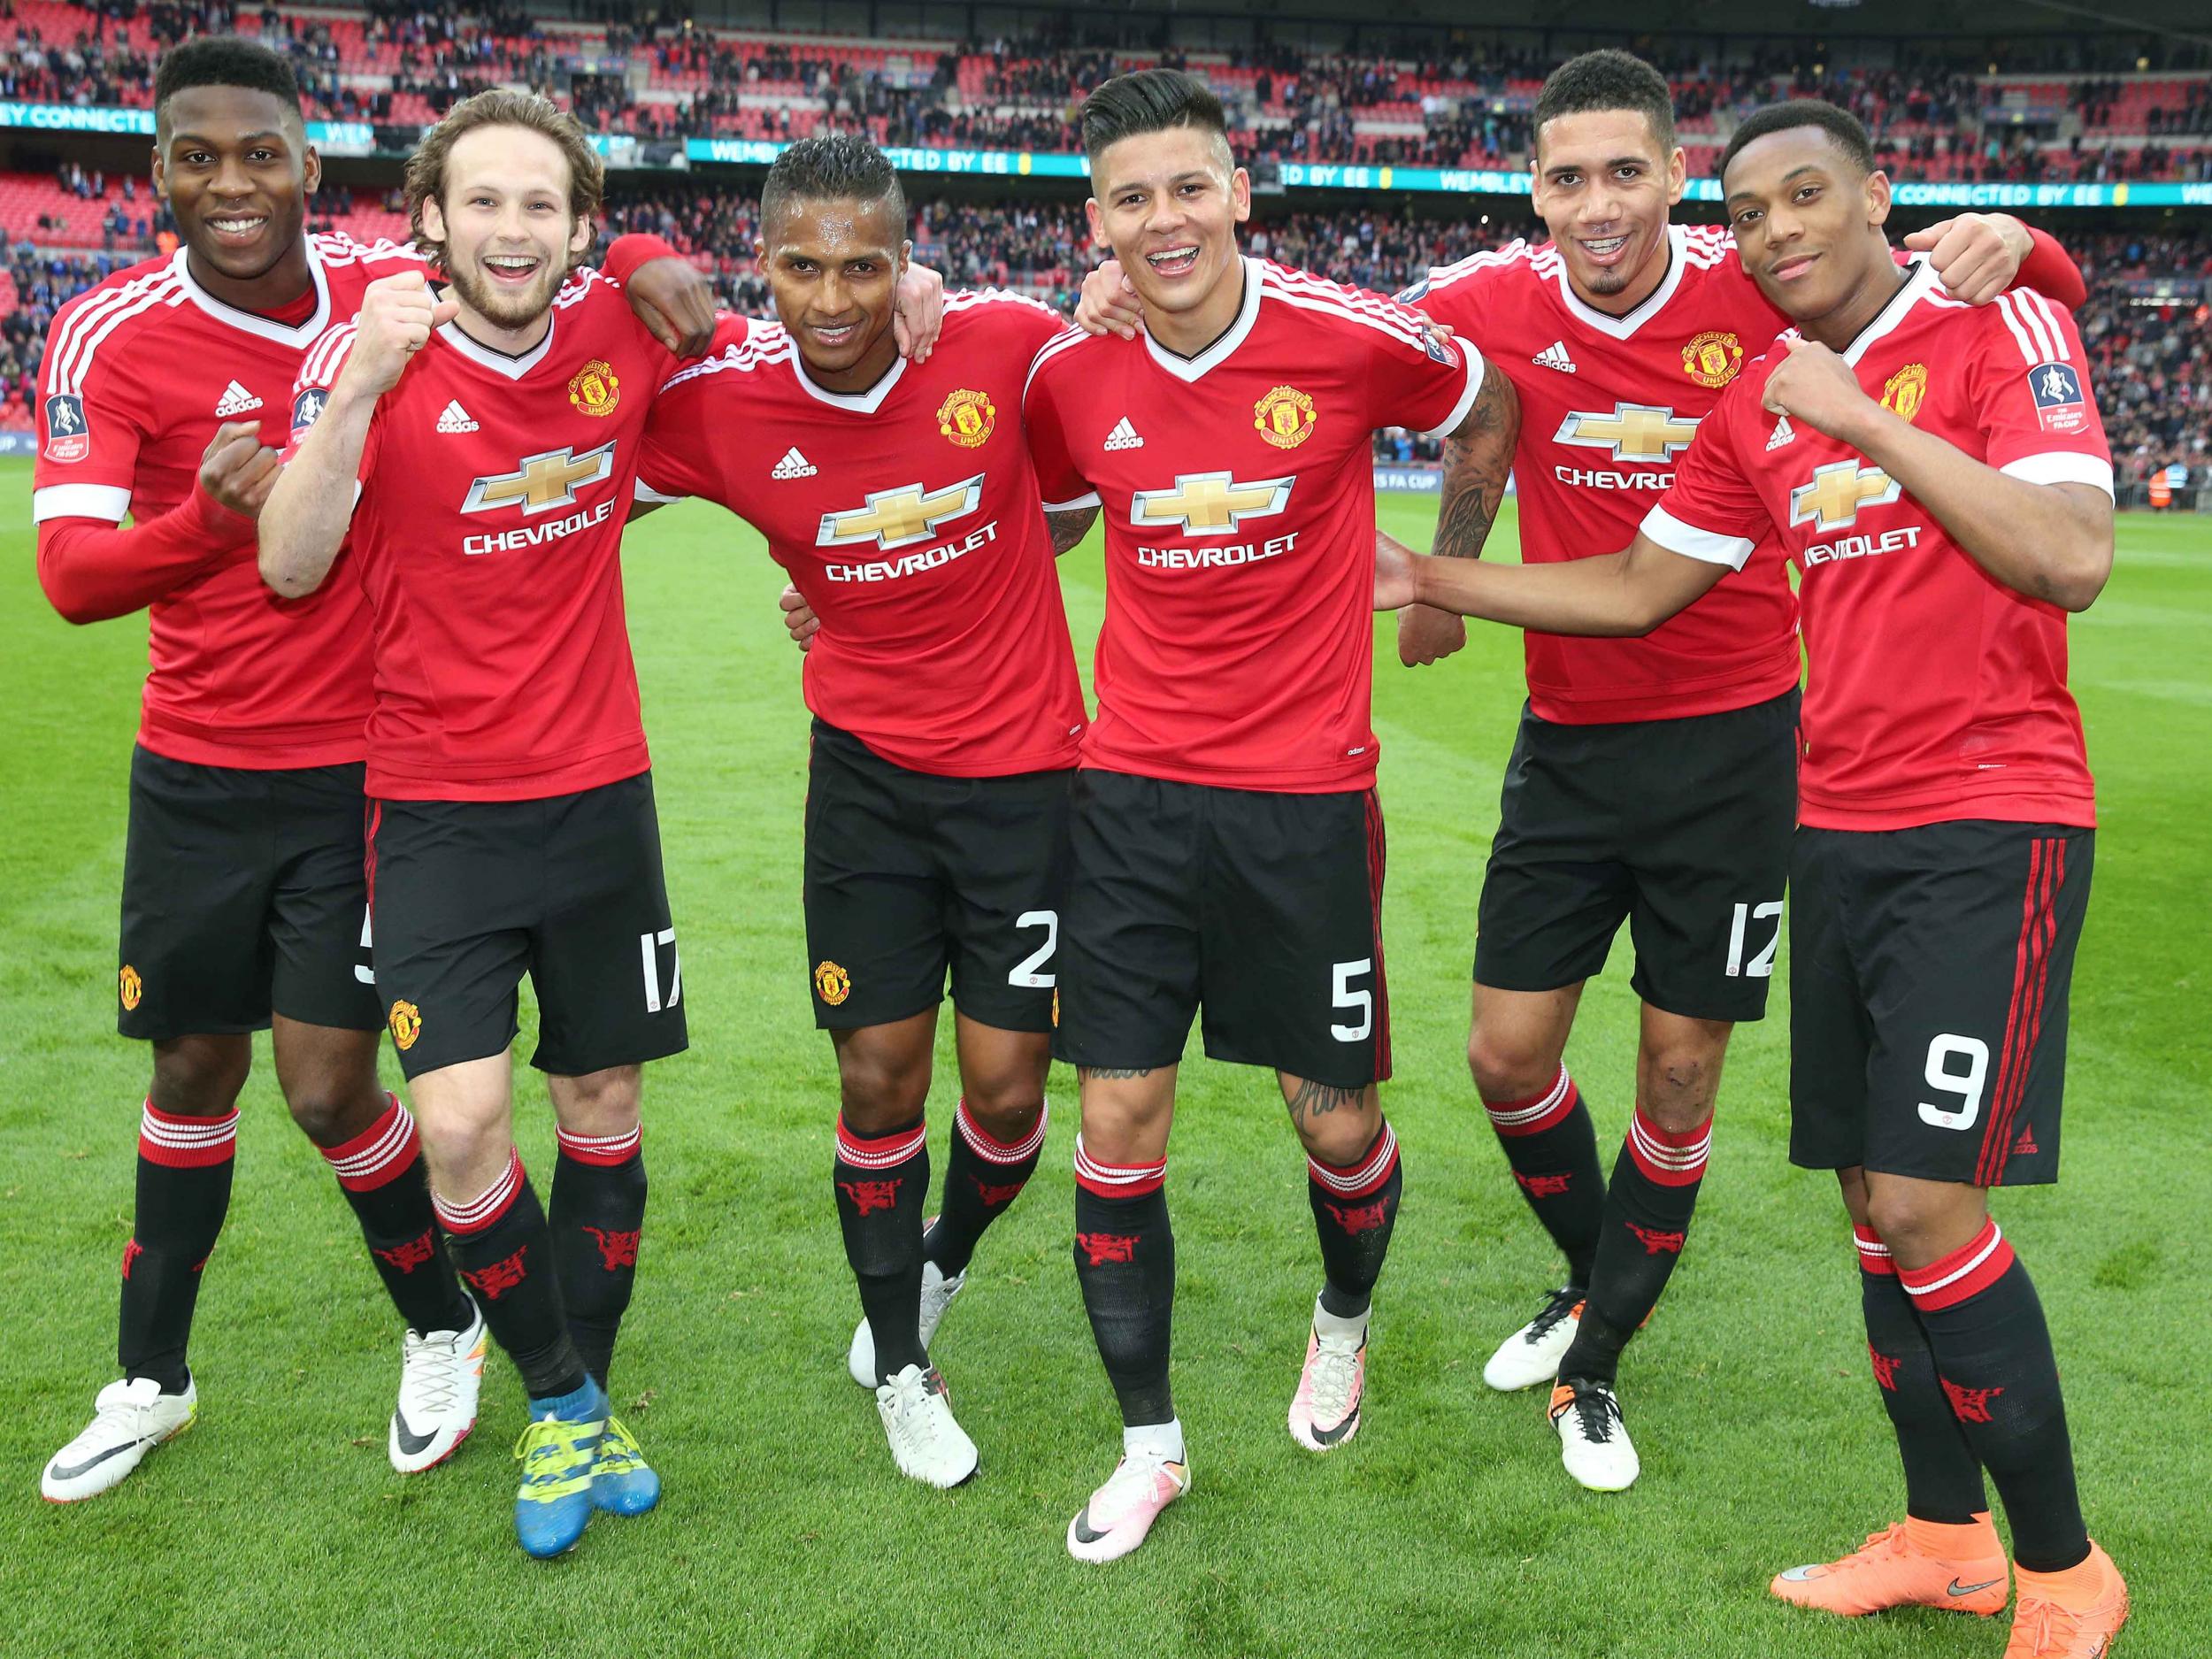 Manchester United's players celebrate their semi-final win